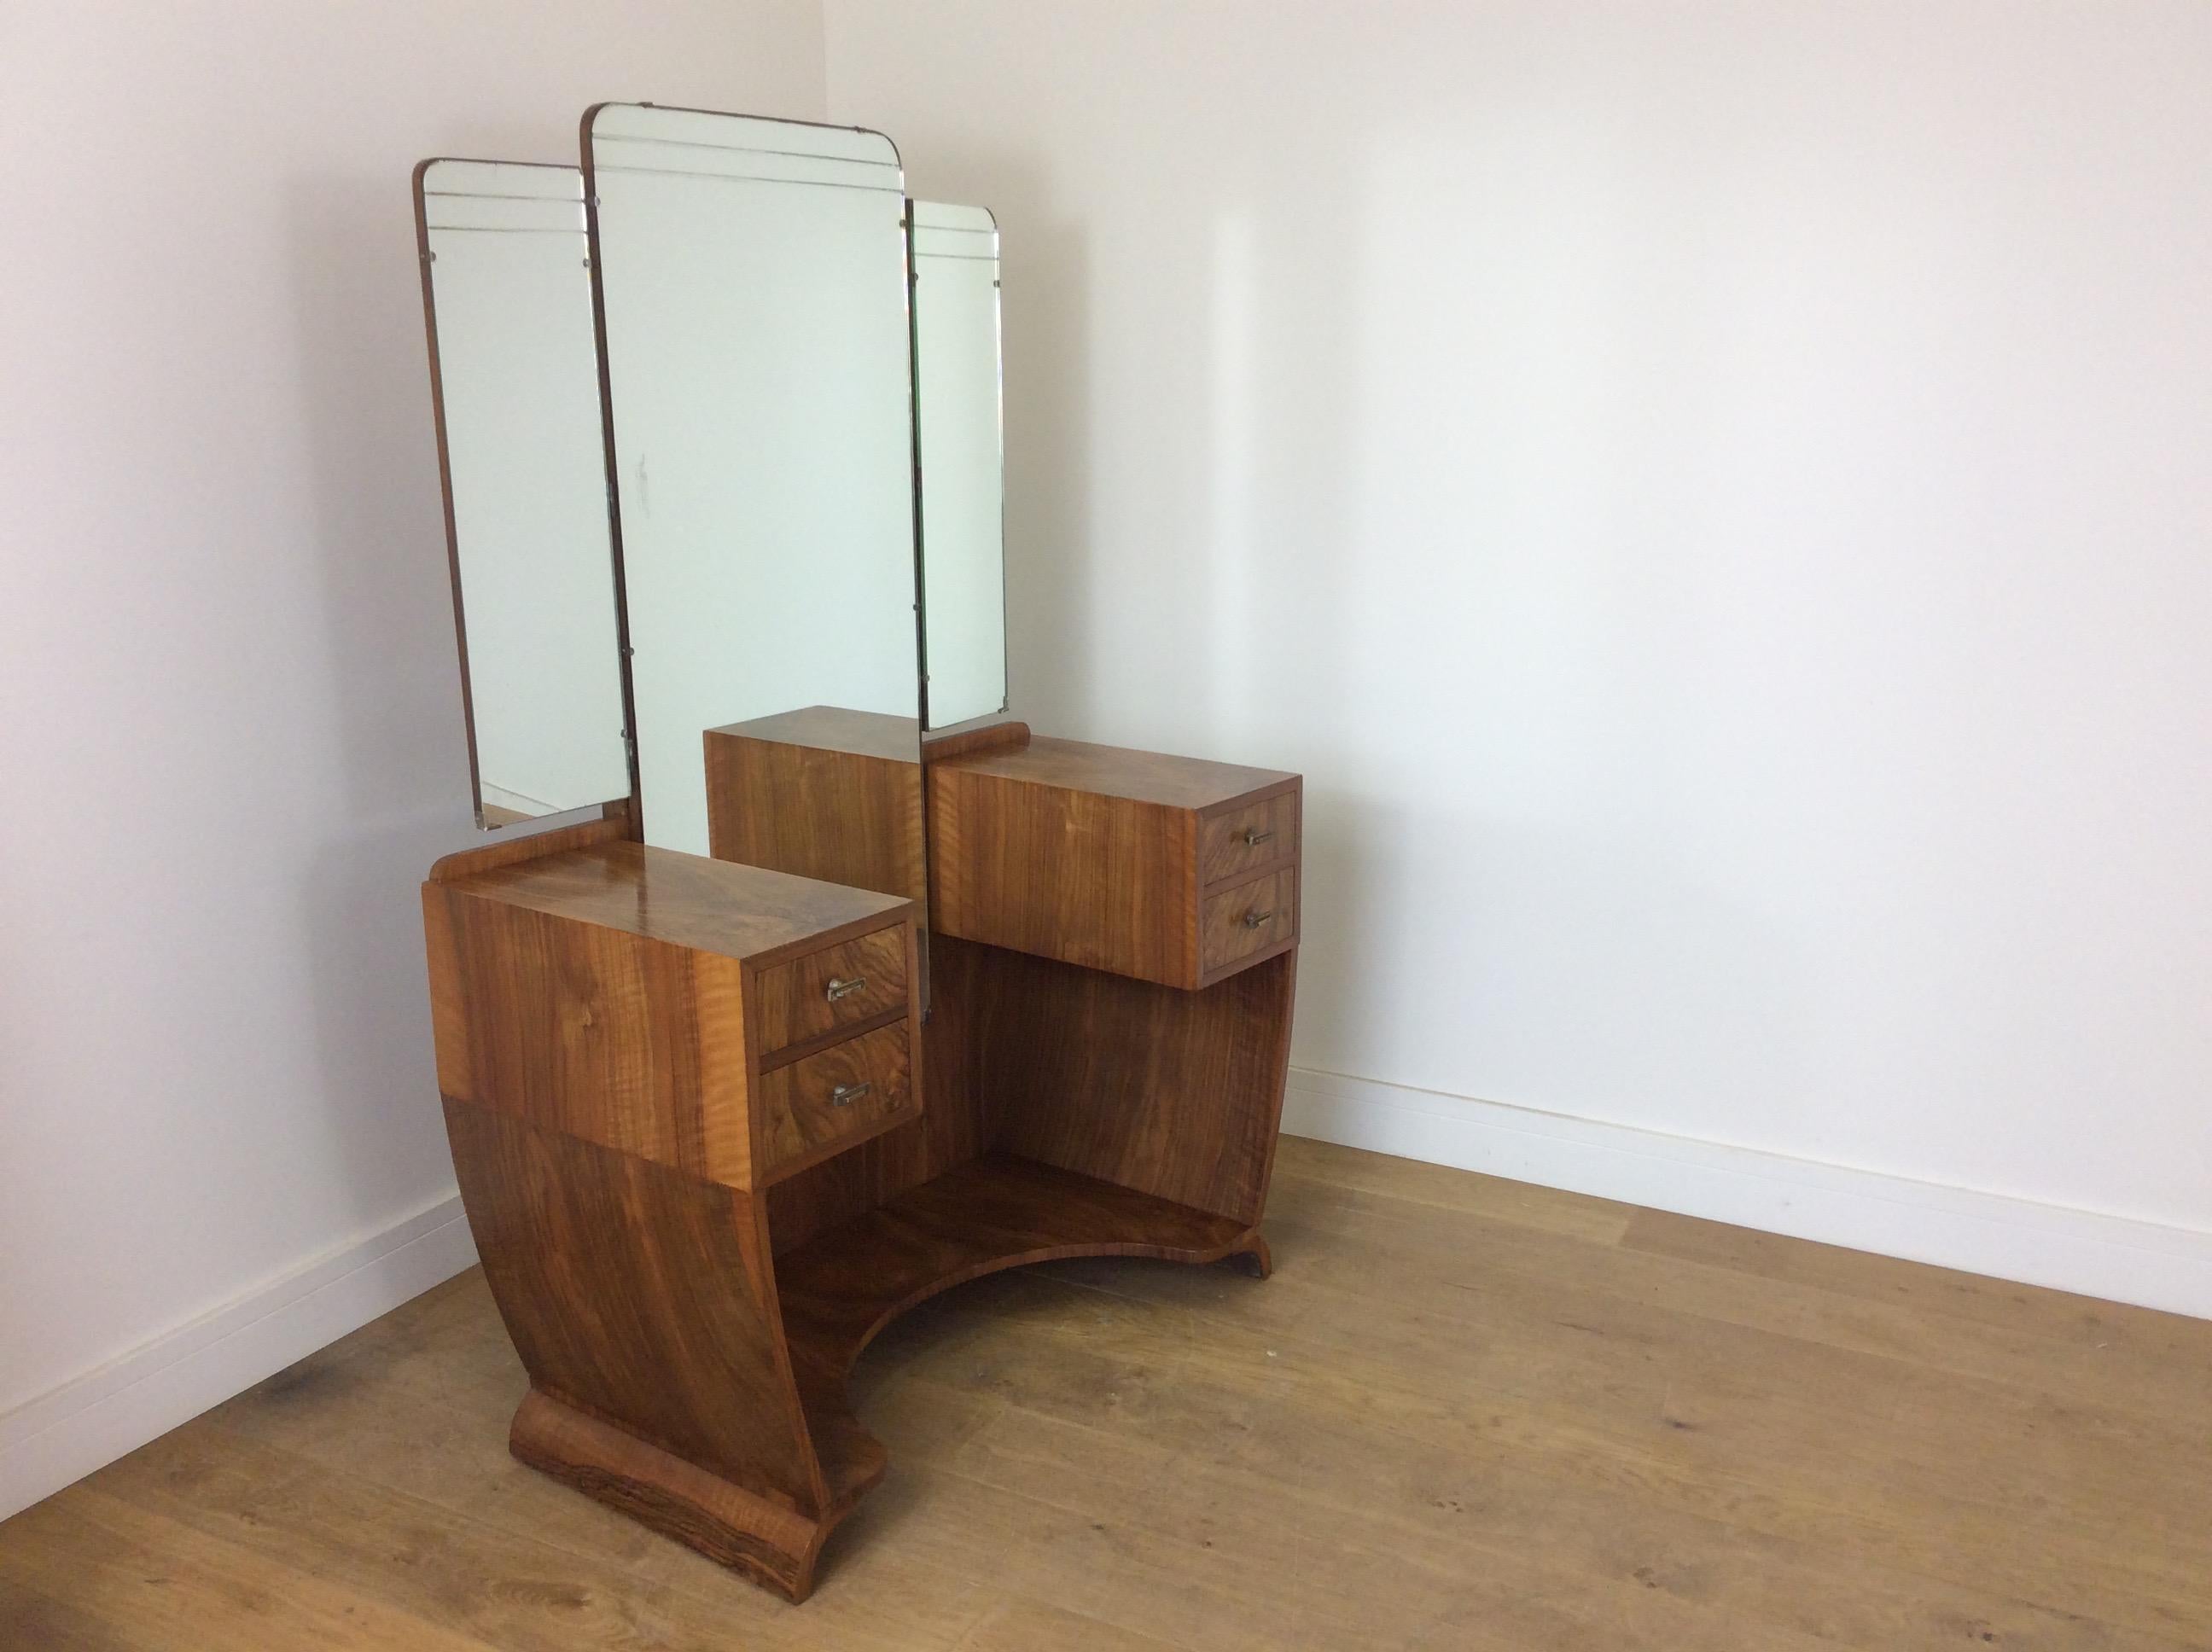 Art Deco bedroom set, with double wardrobe, linen press and dressing table.
All in a stunning figured walnut with skyscraper front.
Art Deco linen press. 119 cm H 76 cm w 48.5 cm D
Art Deco dressing table with full length mirror. 158 cm H 107 cm